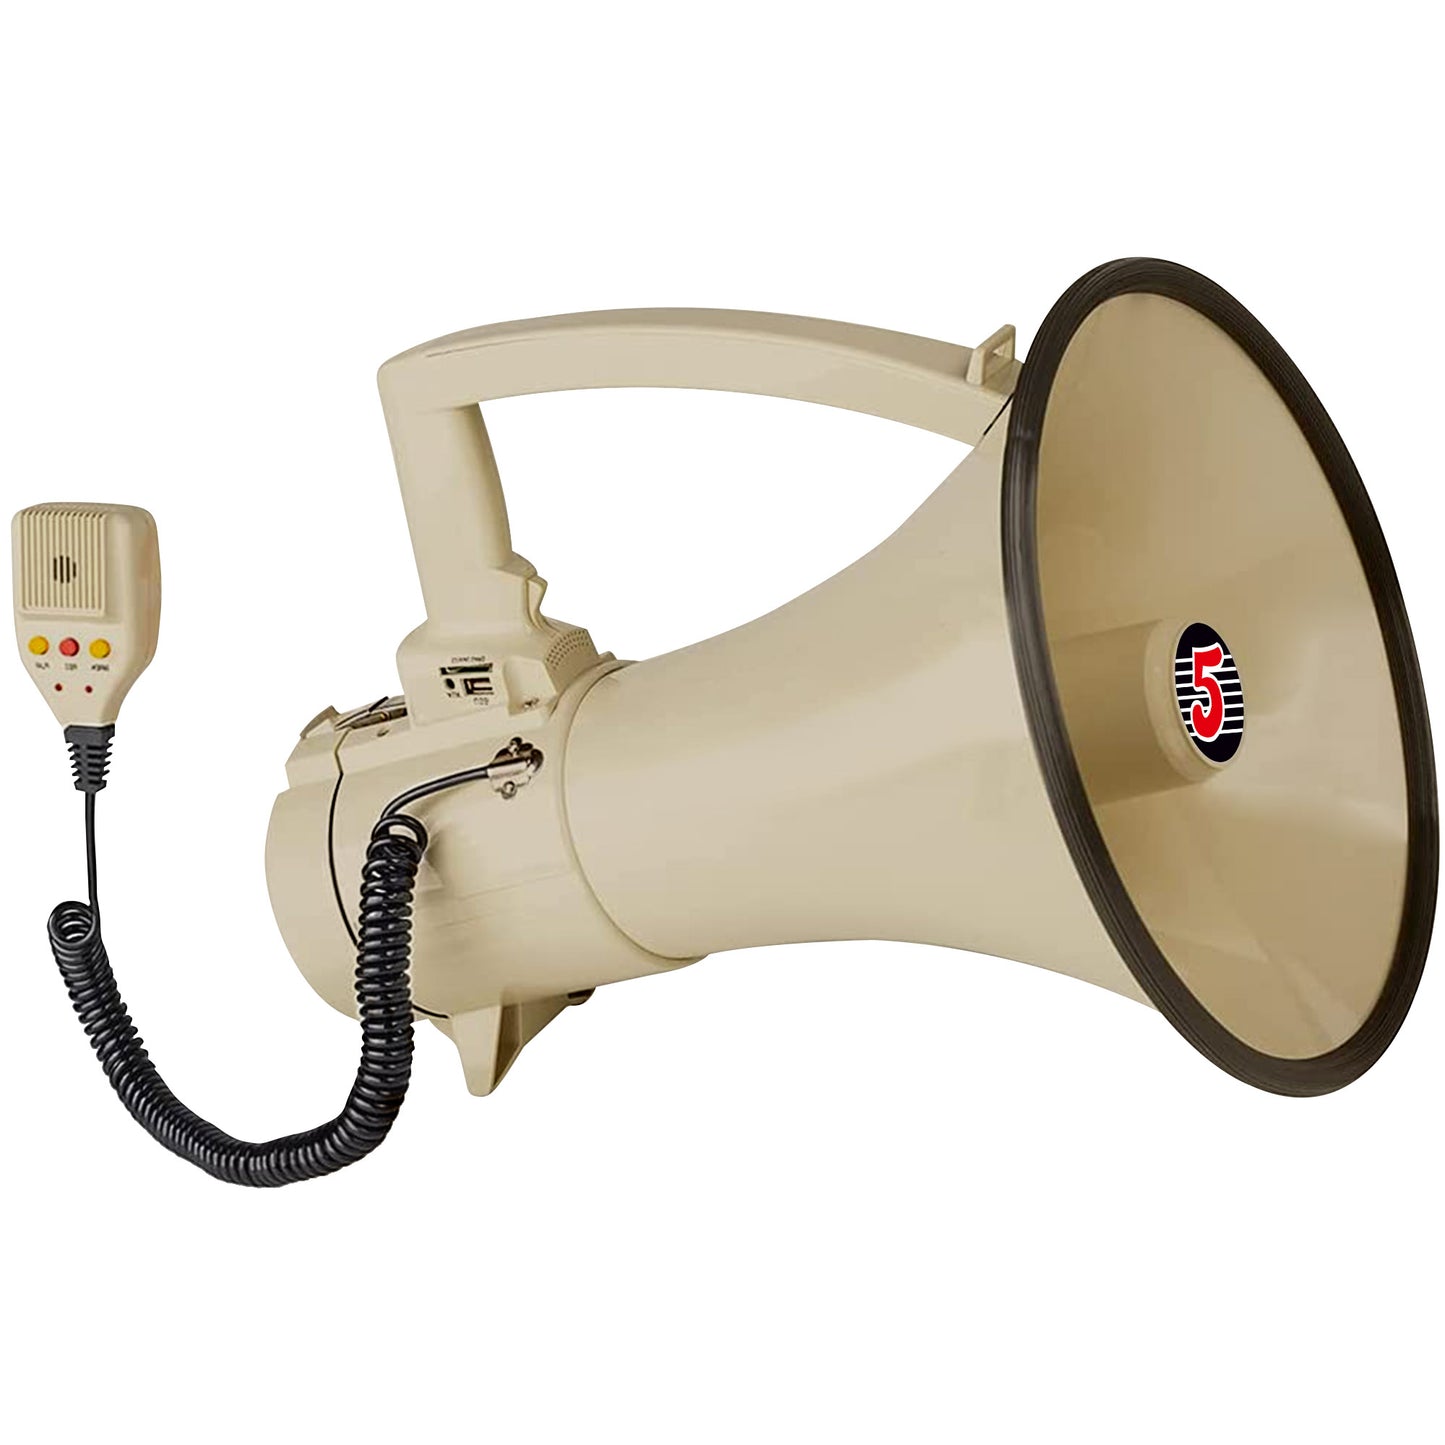 5 Core Professional Megaphone | 70W PMPO Bull Horn for Clear Sound with Ergonomic Grip| Multi-Function with Talk, Siren, Record| USB, SD, AUX Input| Handheld Mic Indoor & Outdoor Use- 3501 USB